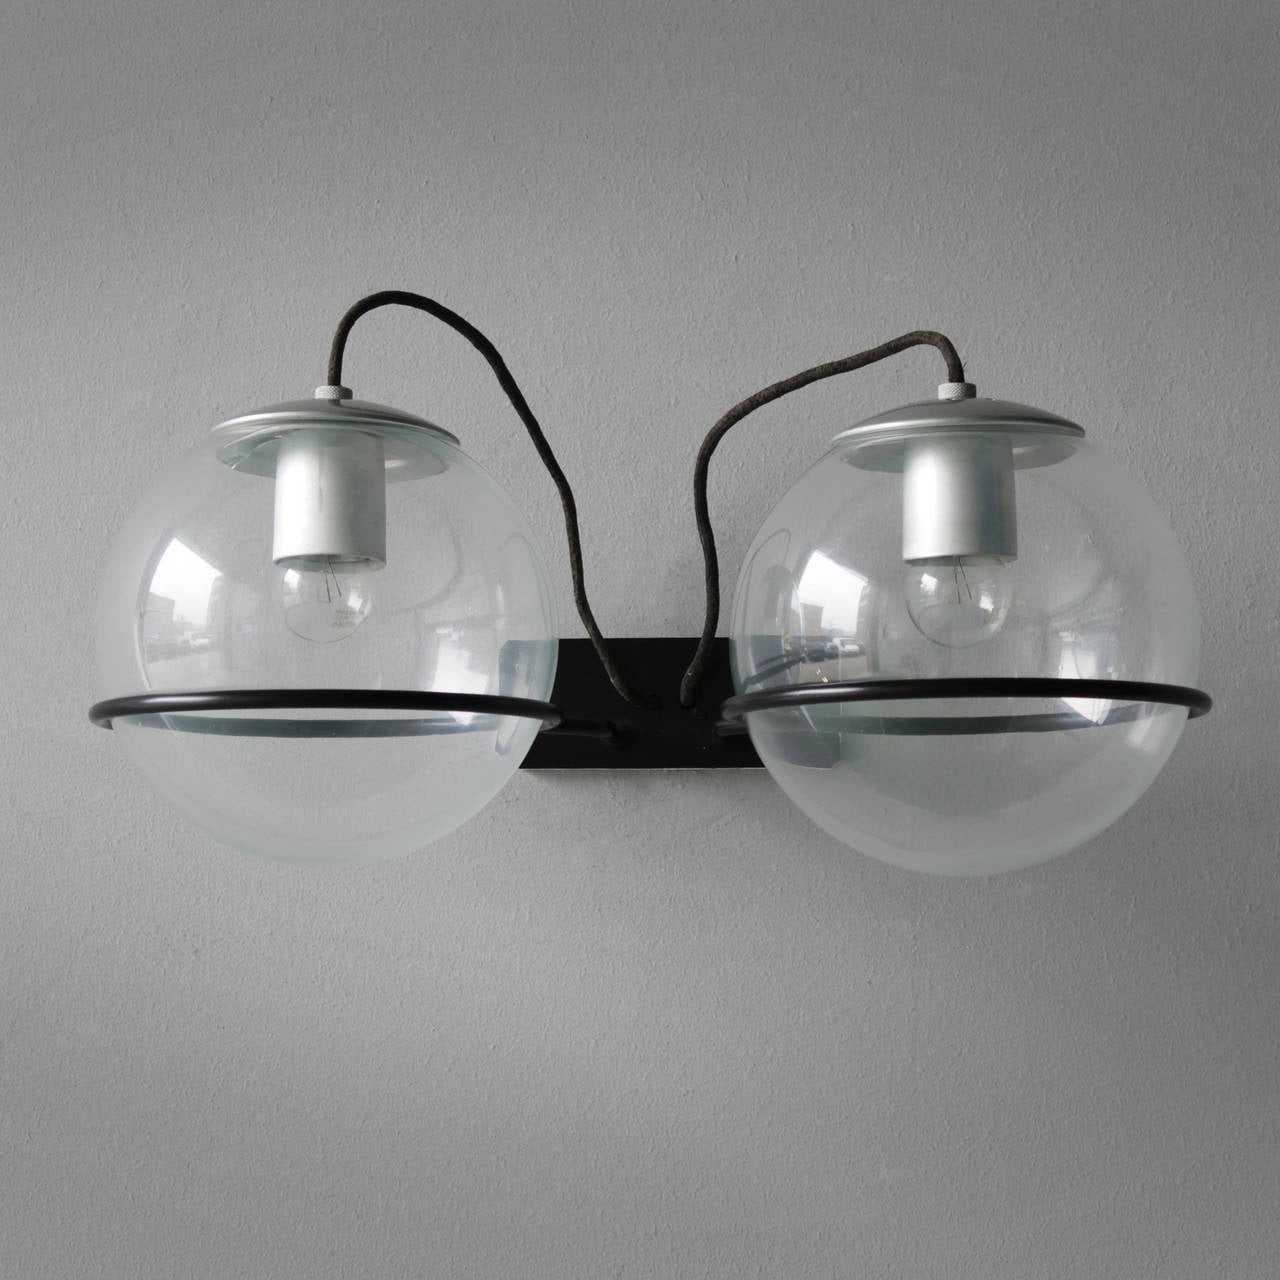 Wall light model 237/2 by Gino Sarfatti for Arteluce, Milano. Marked. Spherical diffuser with transparent glass, rested on the black lacquered iron bar support rings. Closed with oxidized aluminium plate.
Rare large version, measurements: diameter